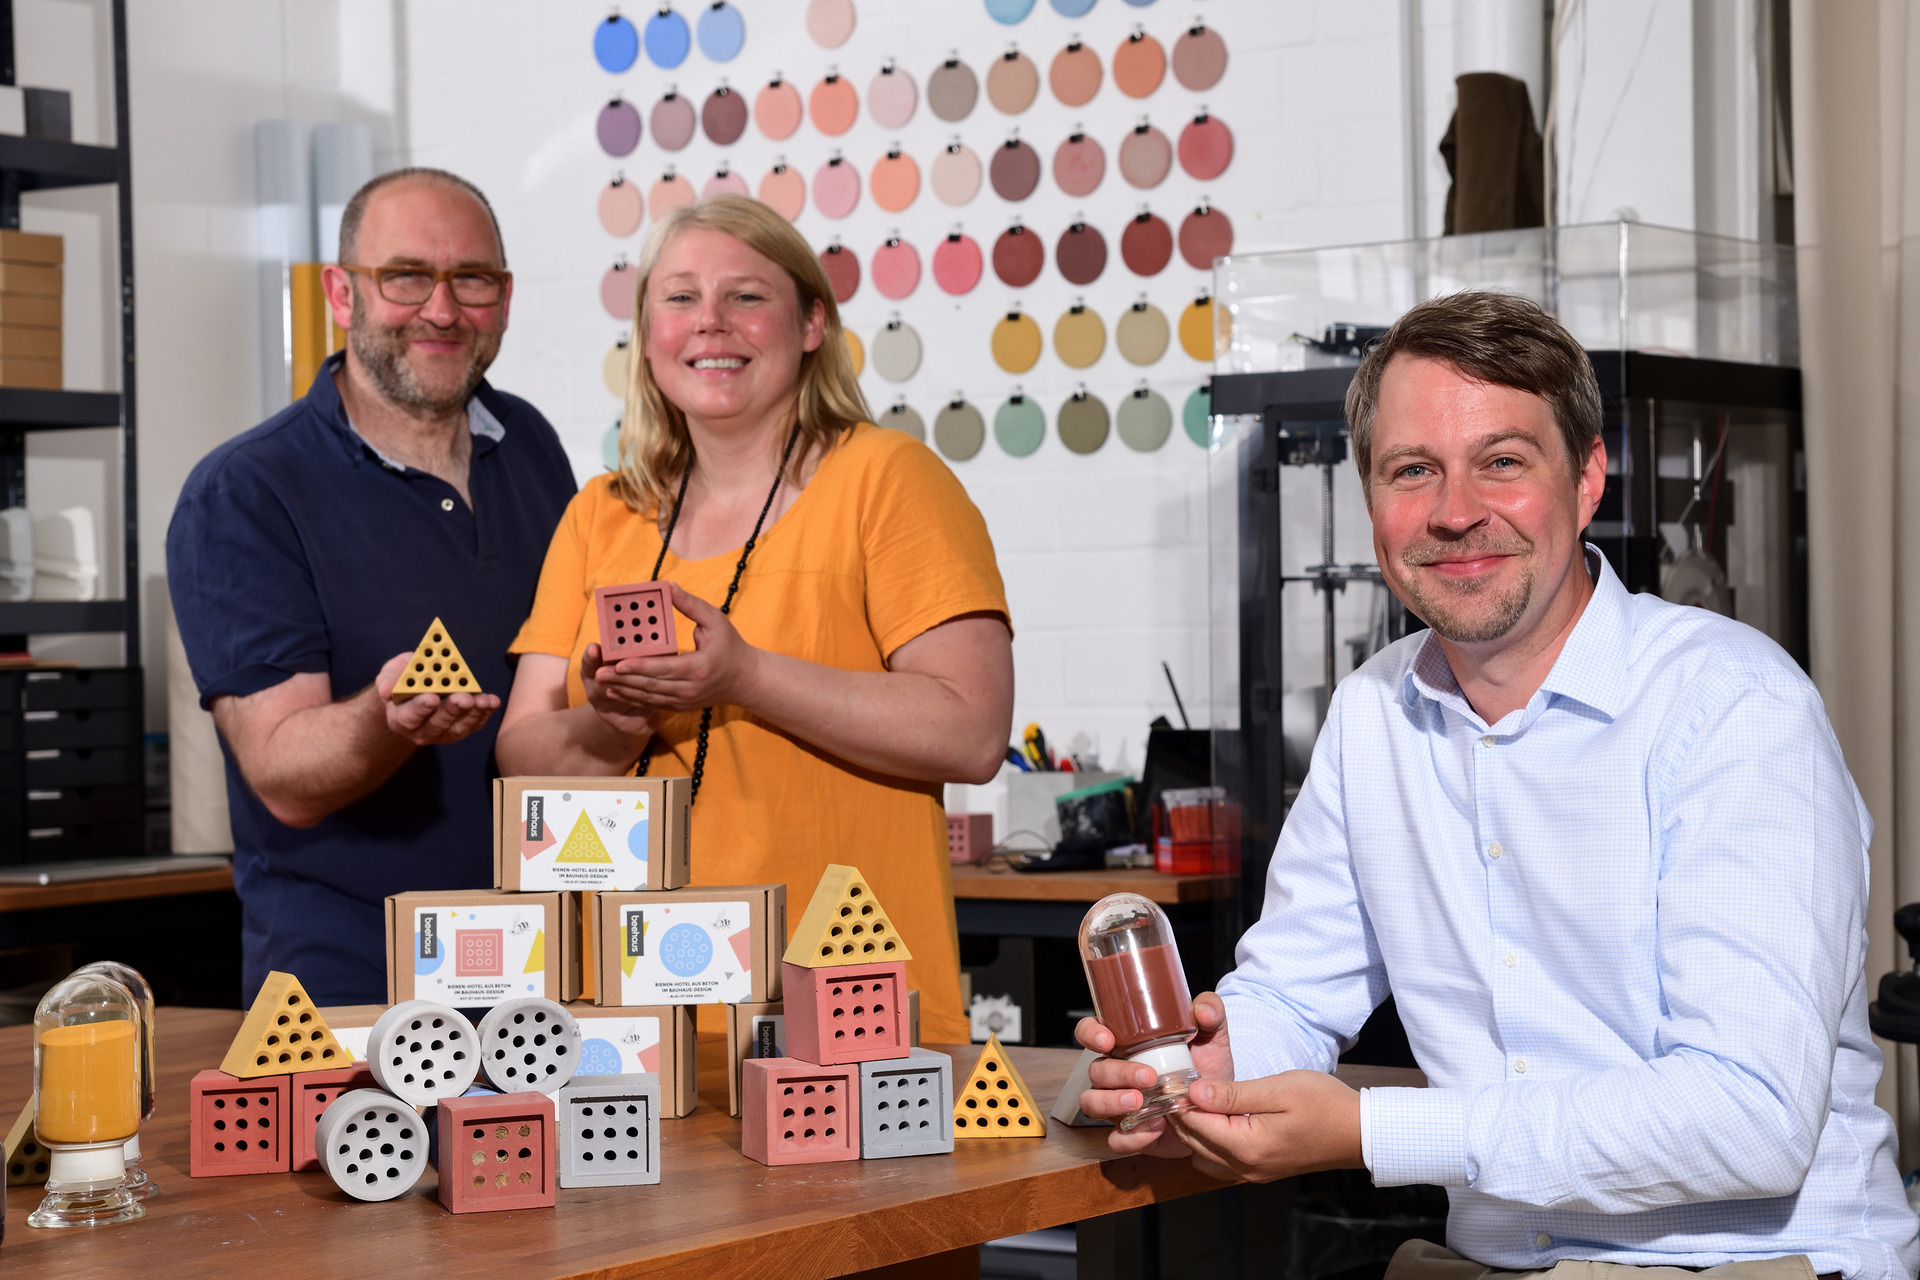 Christoph Schmidt (right), LANXESS Inorganic Pigments business unit, together with Diana Schmidt-Grellroth and Bernd Grellmann from the Grellroth company, presents the possible applications of pigments in bee houses.